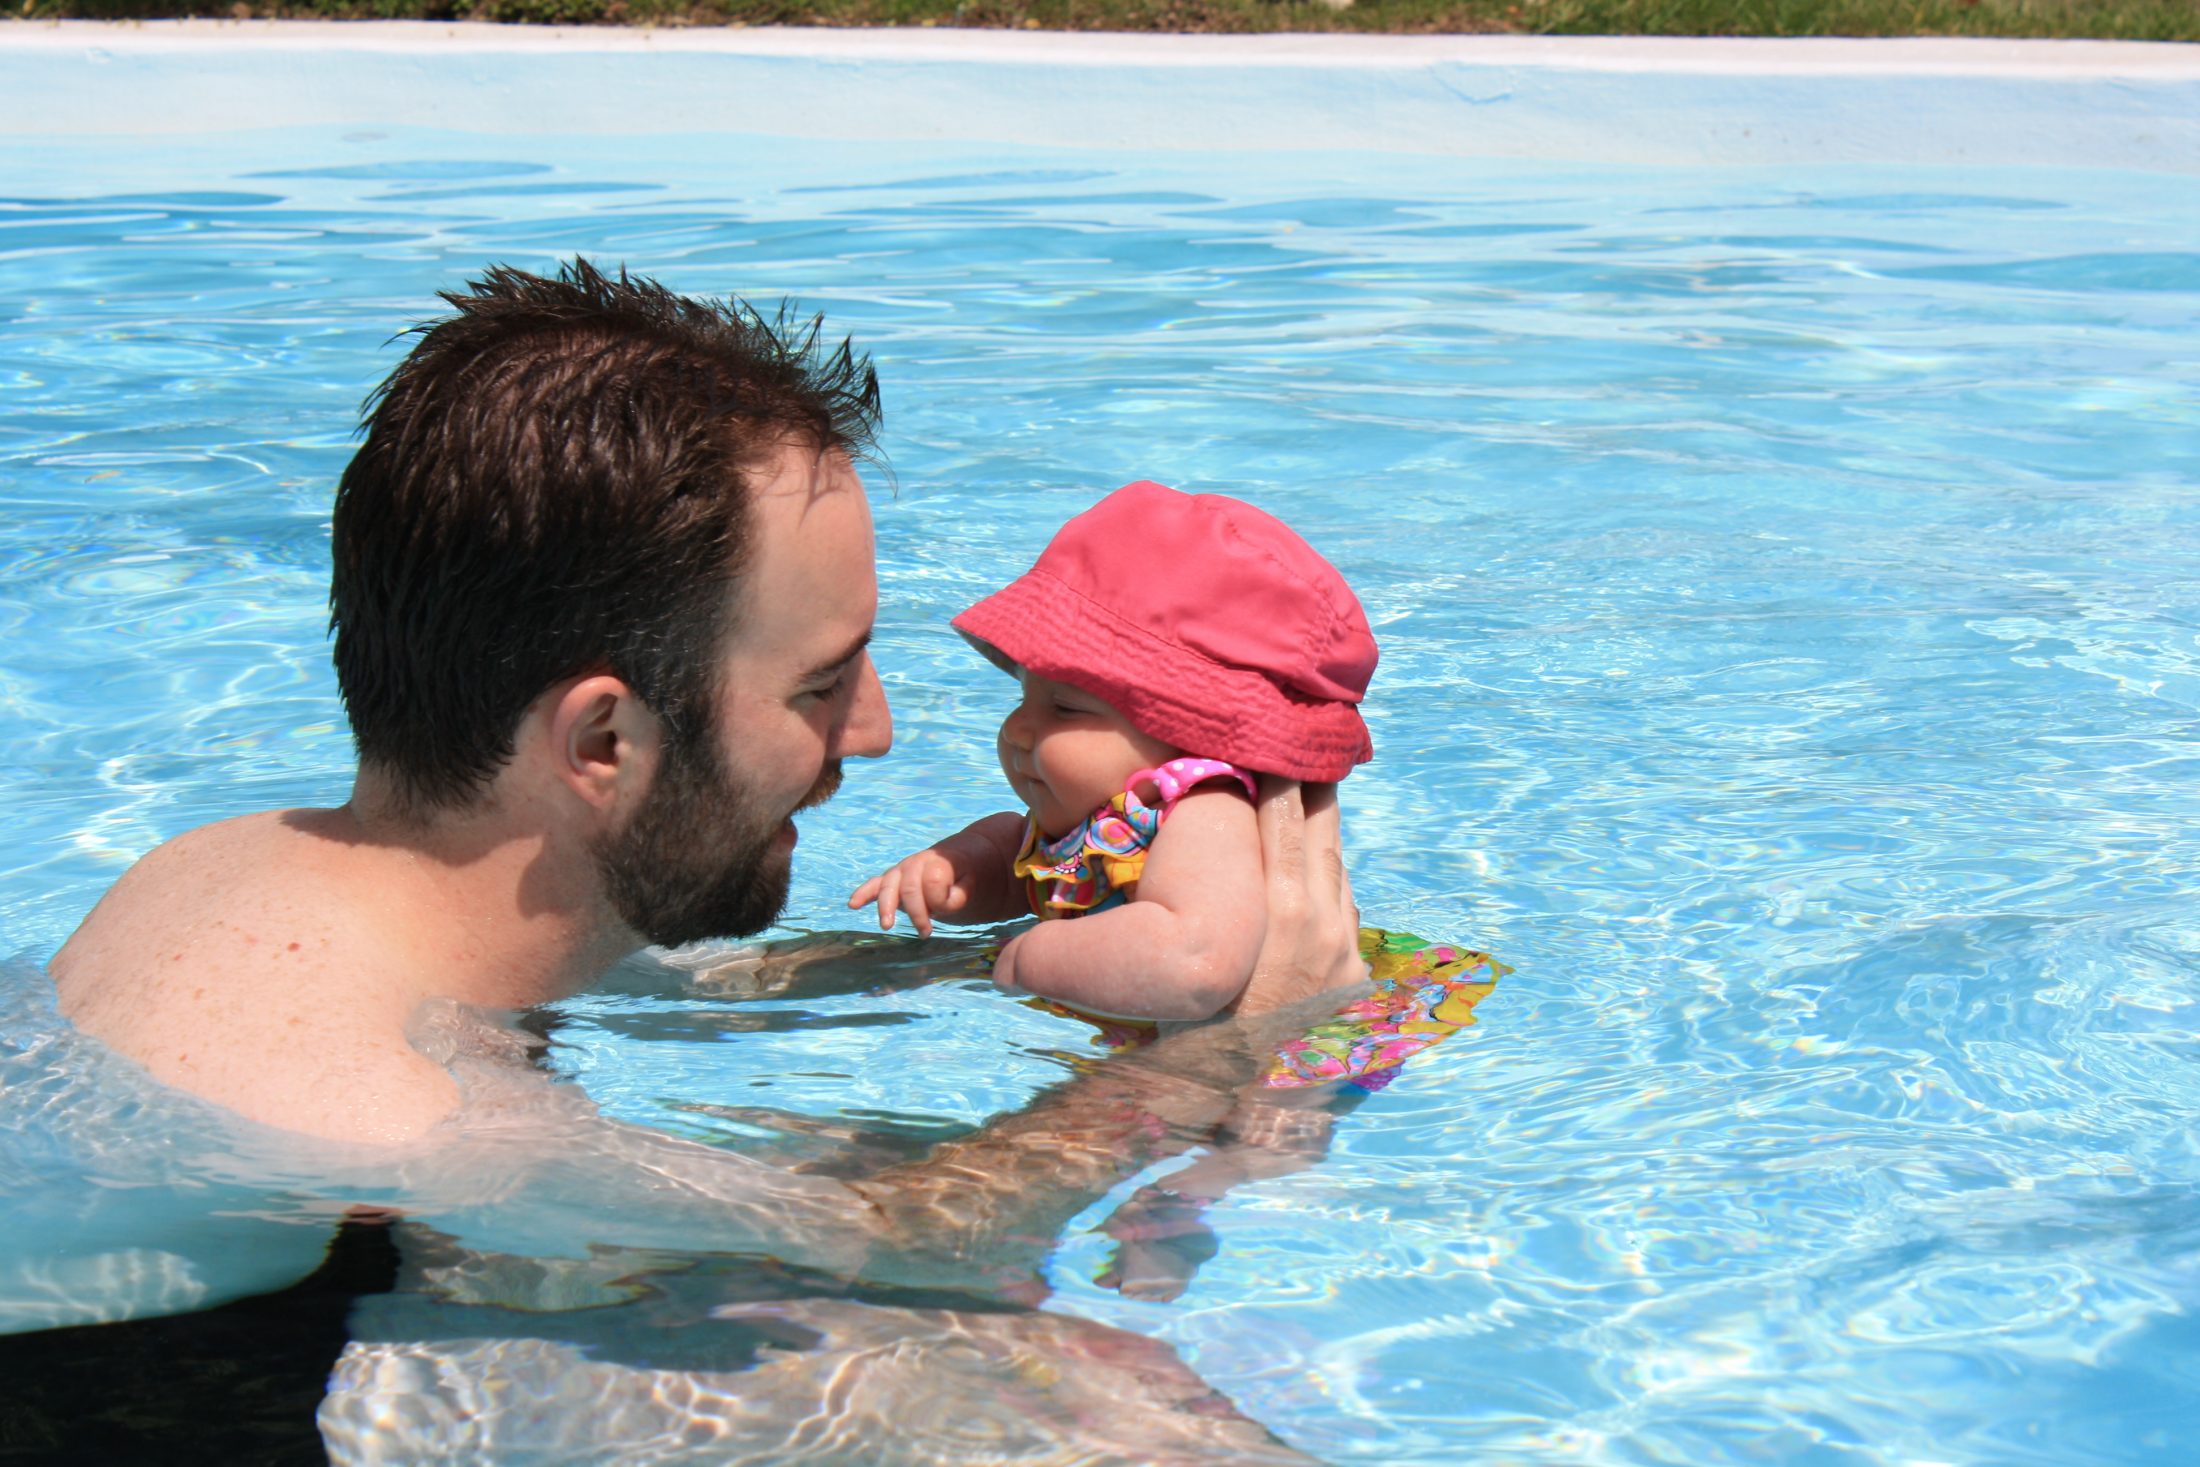 DC widow blog writer Marjorie Brimley's family Shawn and daughter Claire swim in pool when Claire is a baby